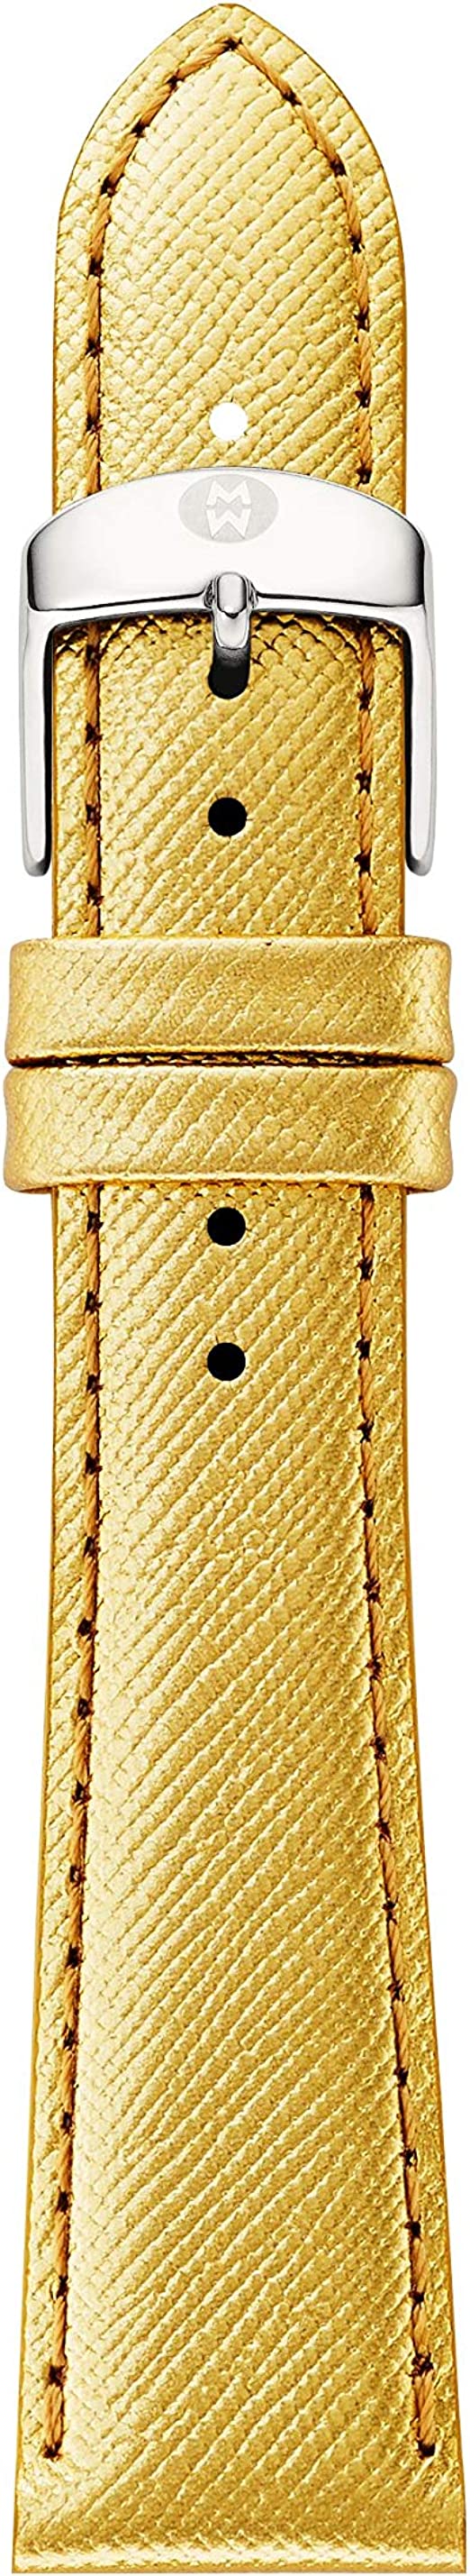 Metallic Gold Leather Watch Strap | Michele | Luby 